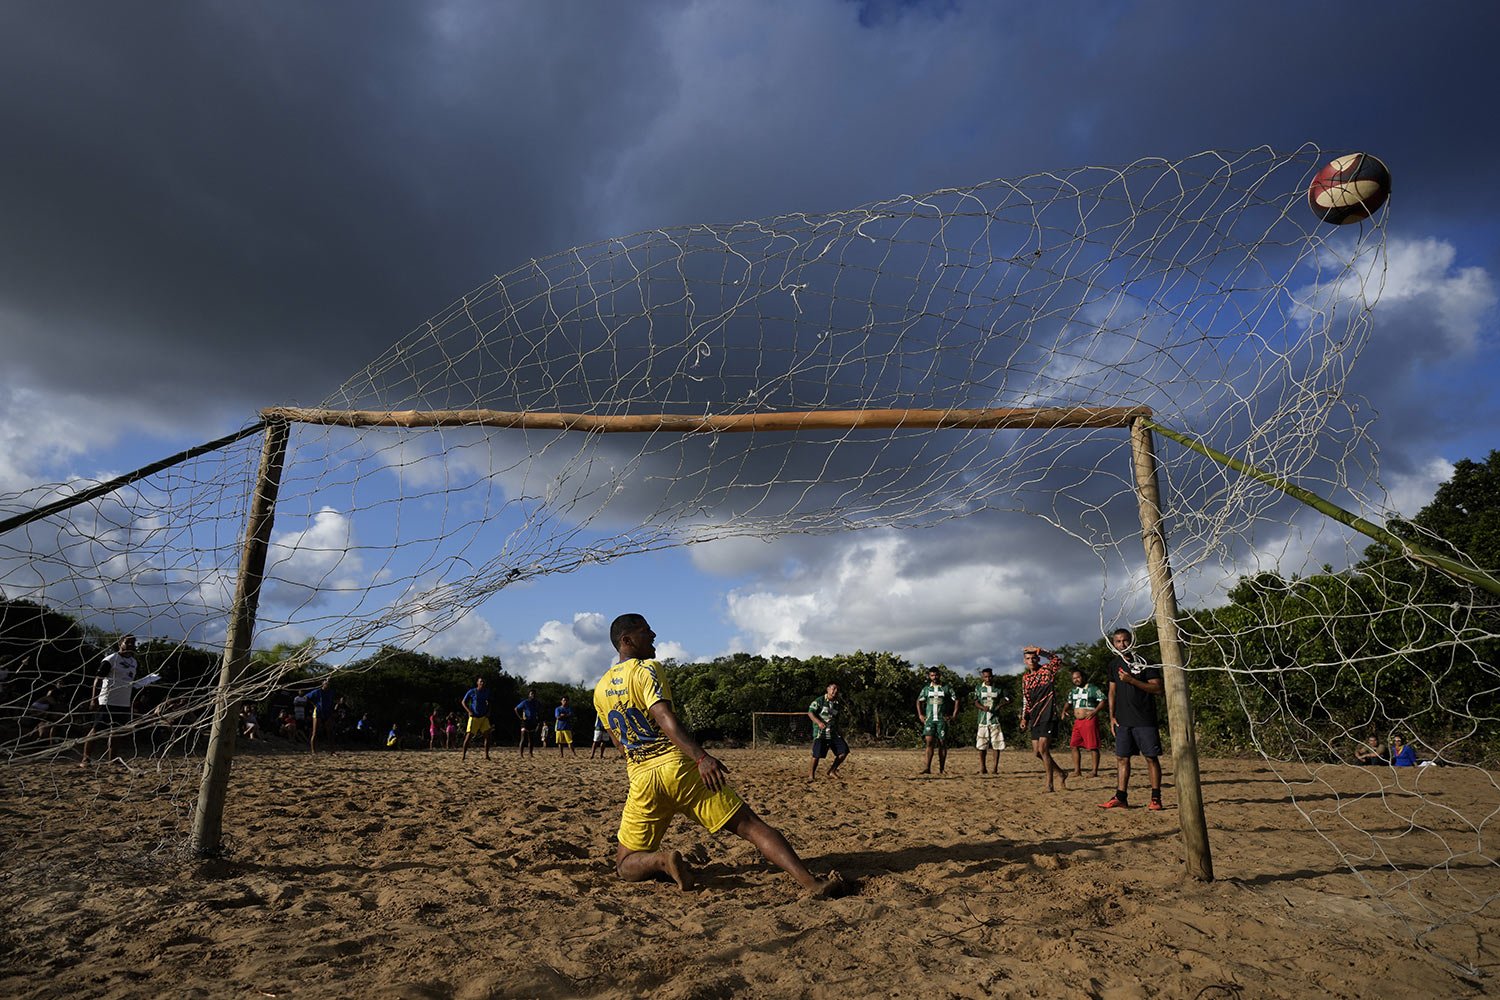  Athletes compete in a soccer match as part of the Indigenous Games, in the Tapirema community of Peruibe, Brazil, April 22, 2023. (AP Photo/Andre Penner) 